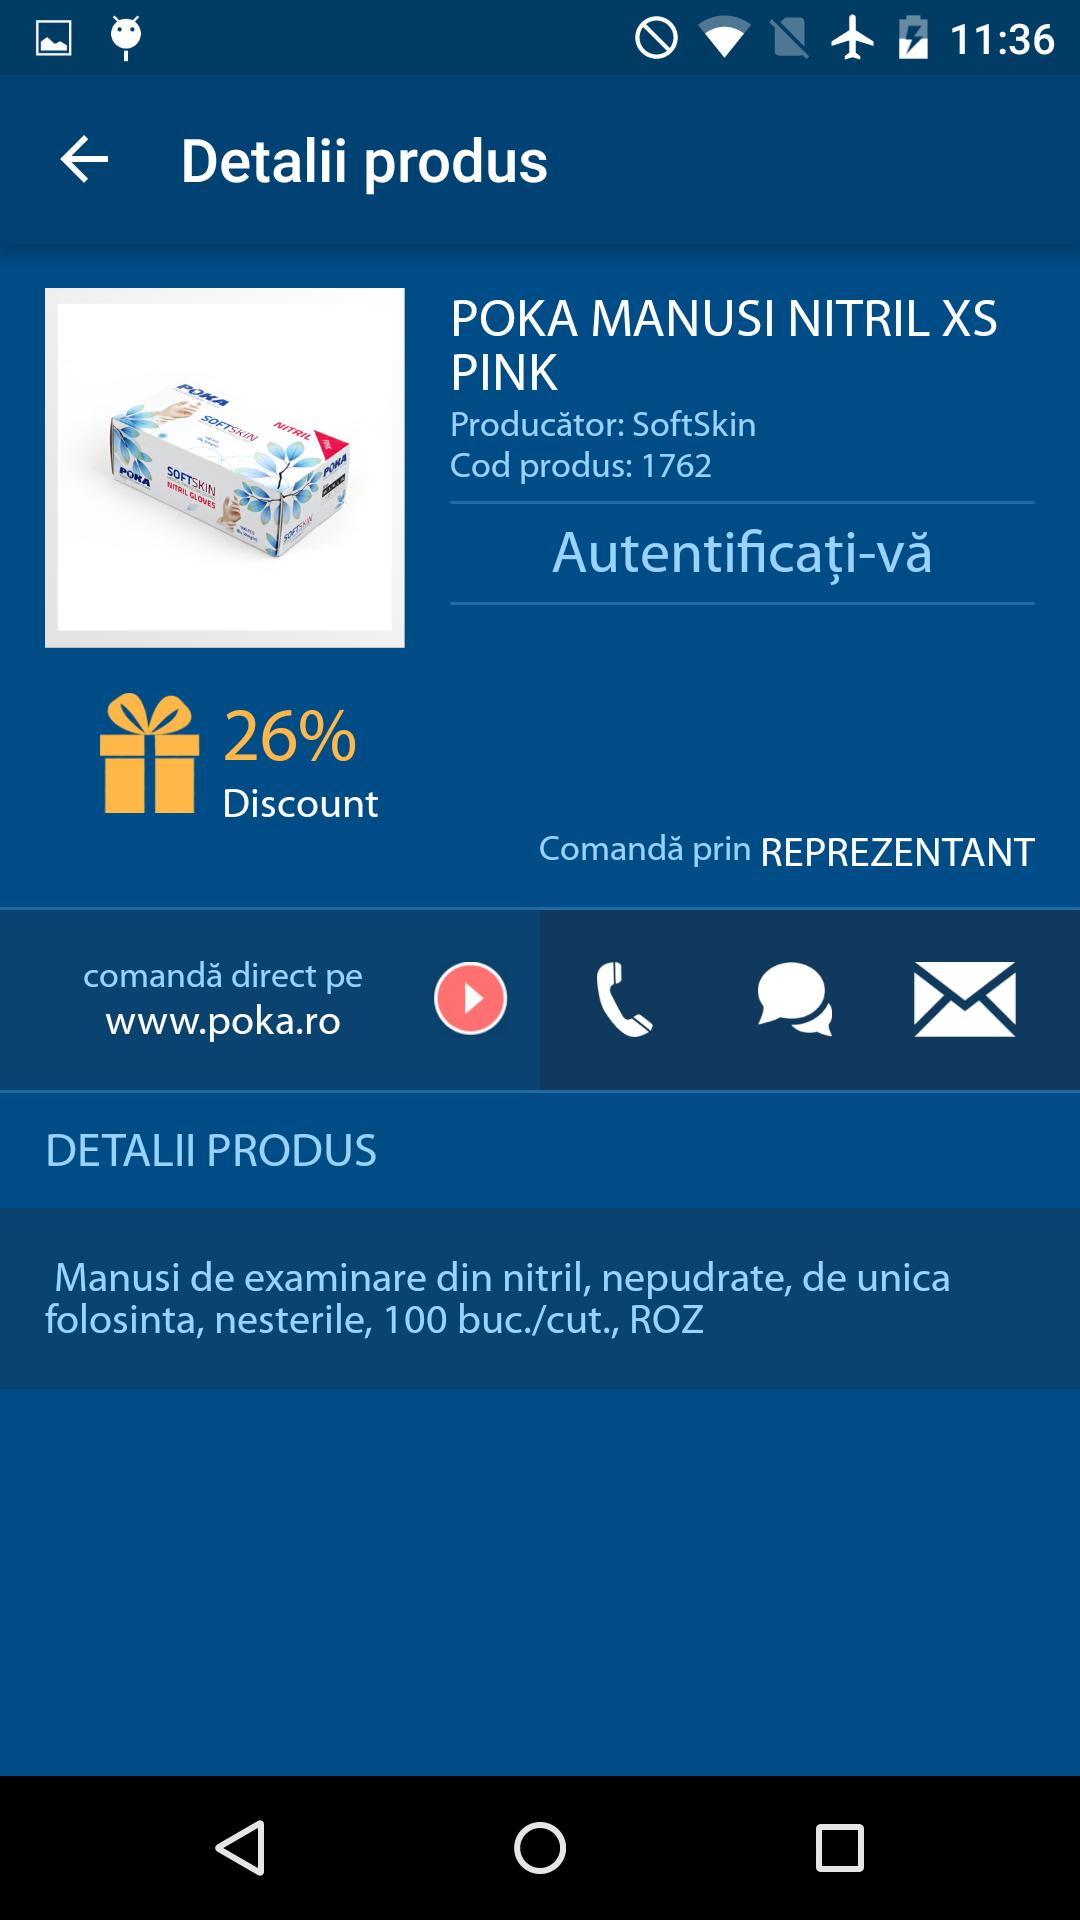 iDental by Poka for Android - APK Download